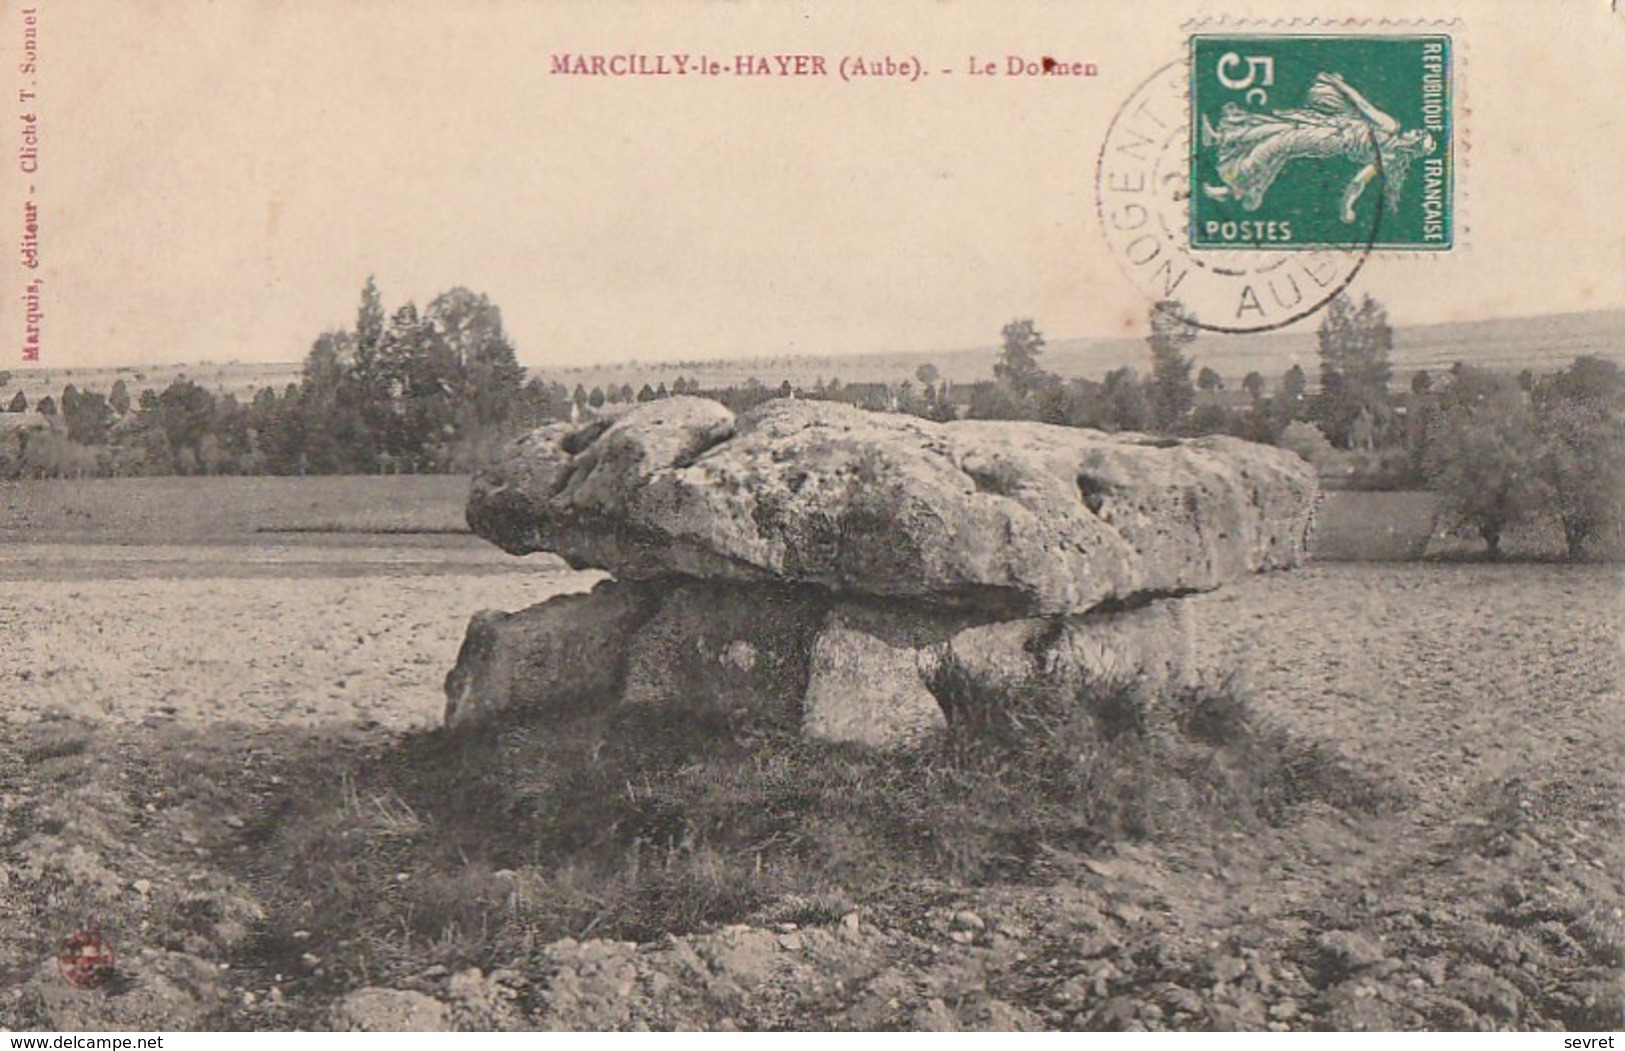 MARCILLY-le-HAYER. - Le Dolmen - Marcilly